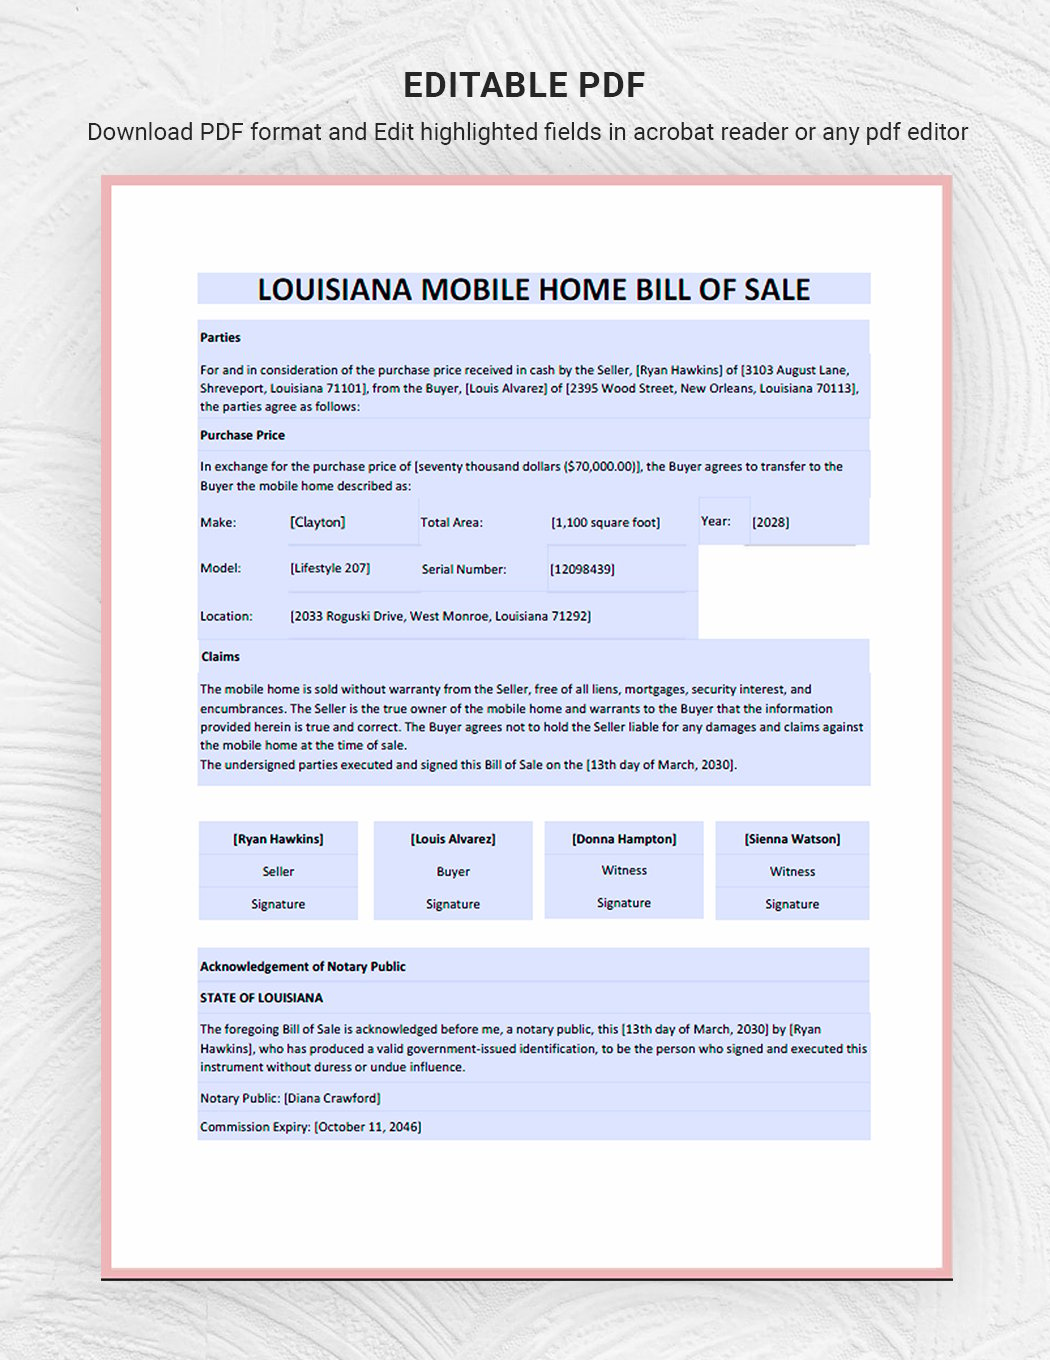 louisiana-mobile-home-bill-of-sale-template-download-in-word-google